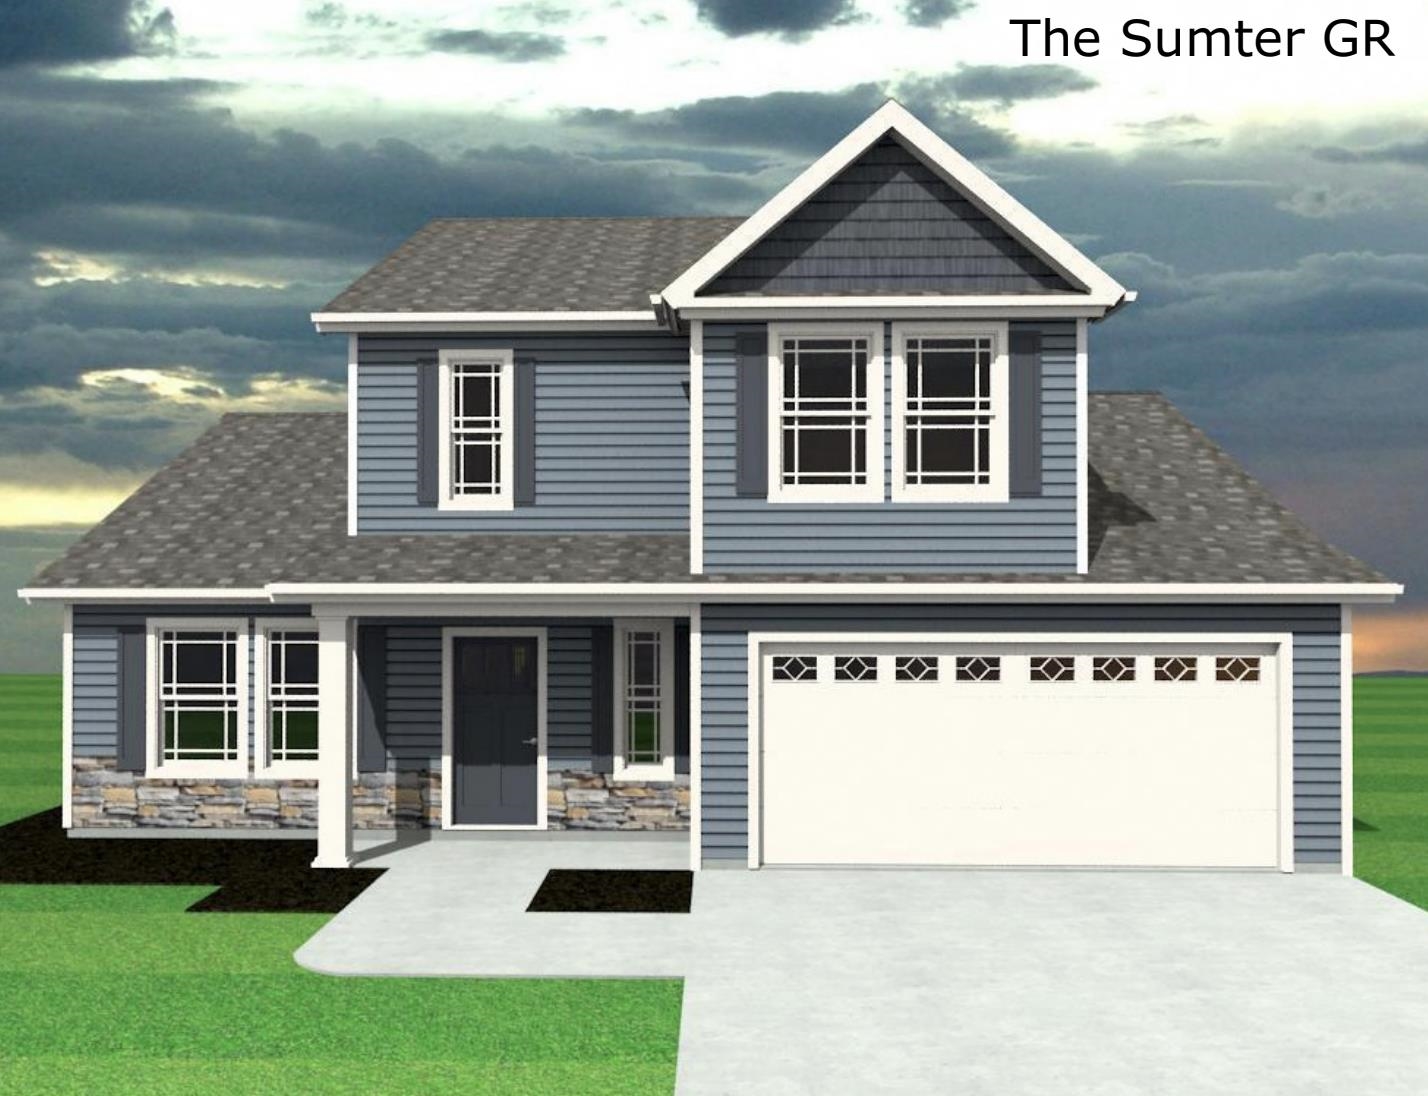 The Sumter.  This plan sports a modern, open layout with tons of character. 2 story living with the master on the 1st floor. The kitchen offers a large island that looks over into the dining and living areas. Ceilings with crown molding and rope lighting. Lot 3.  Preferred Lender/Attorney Closing Costs Incentive Offered!